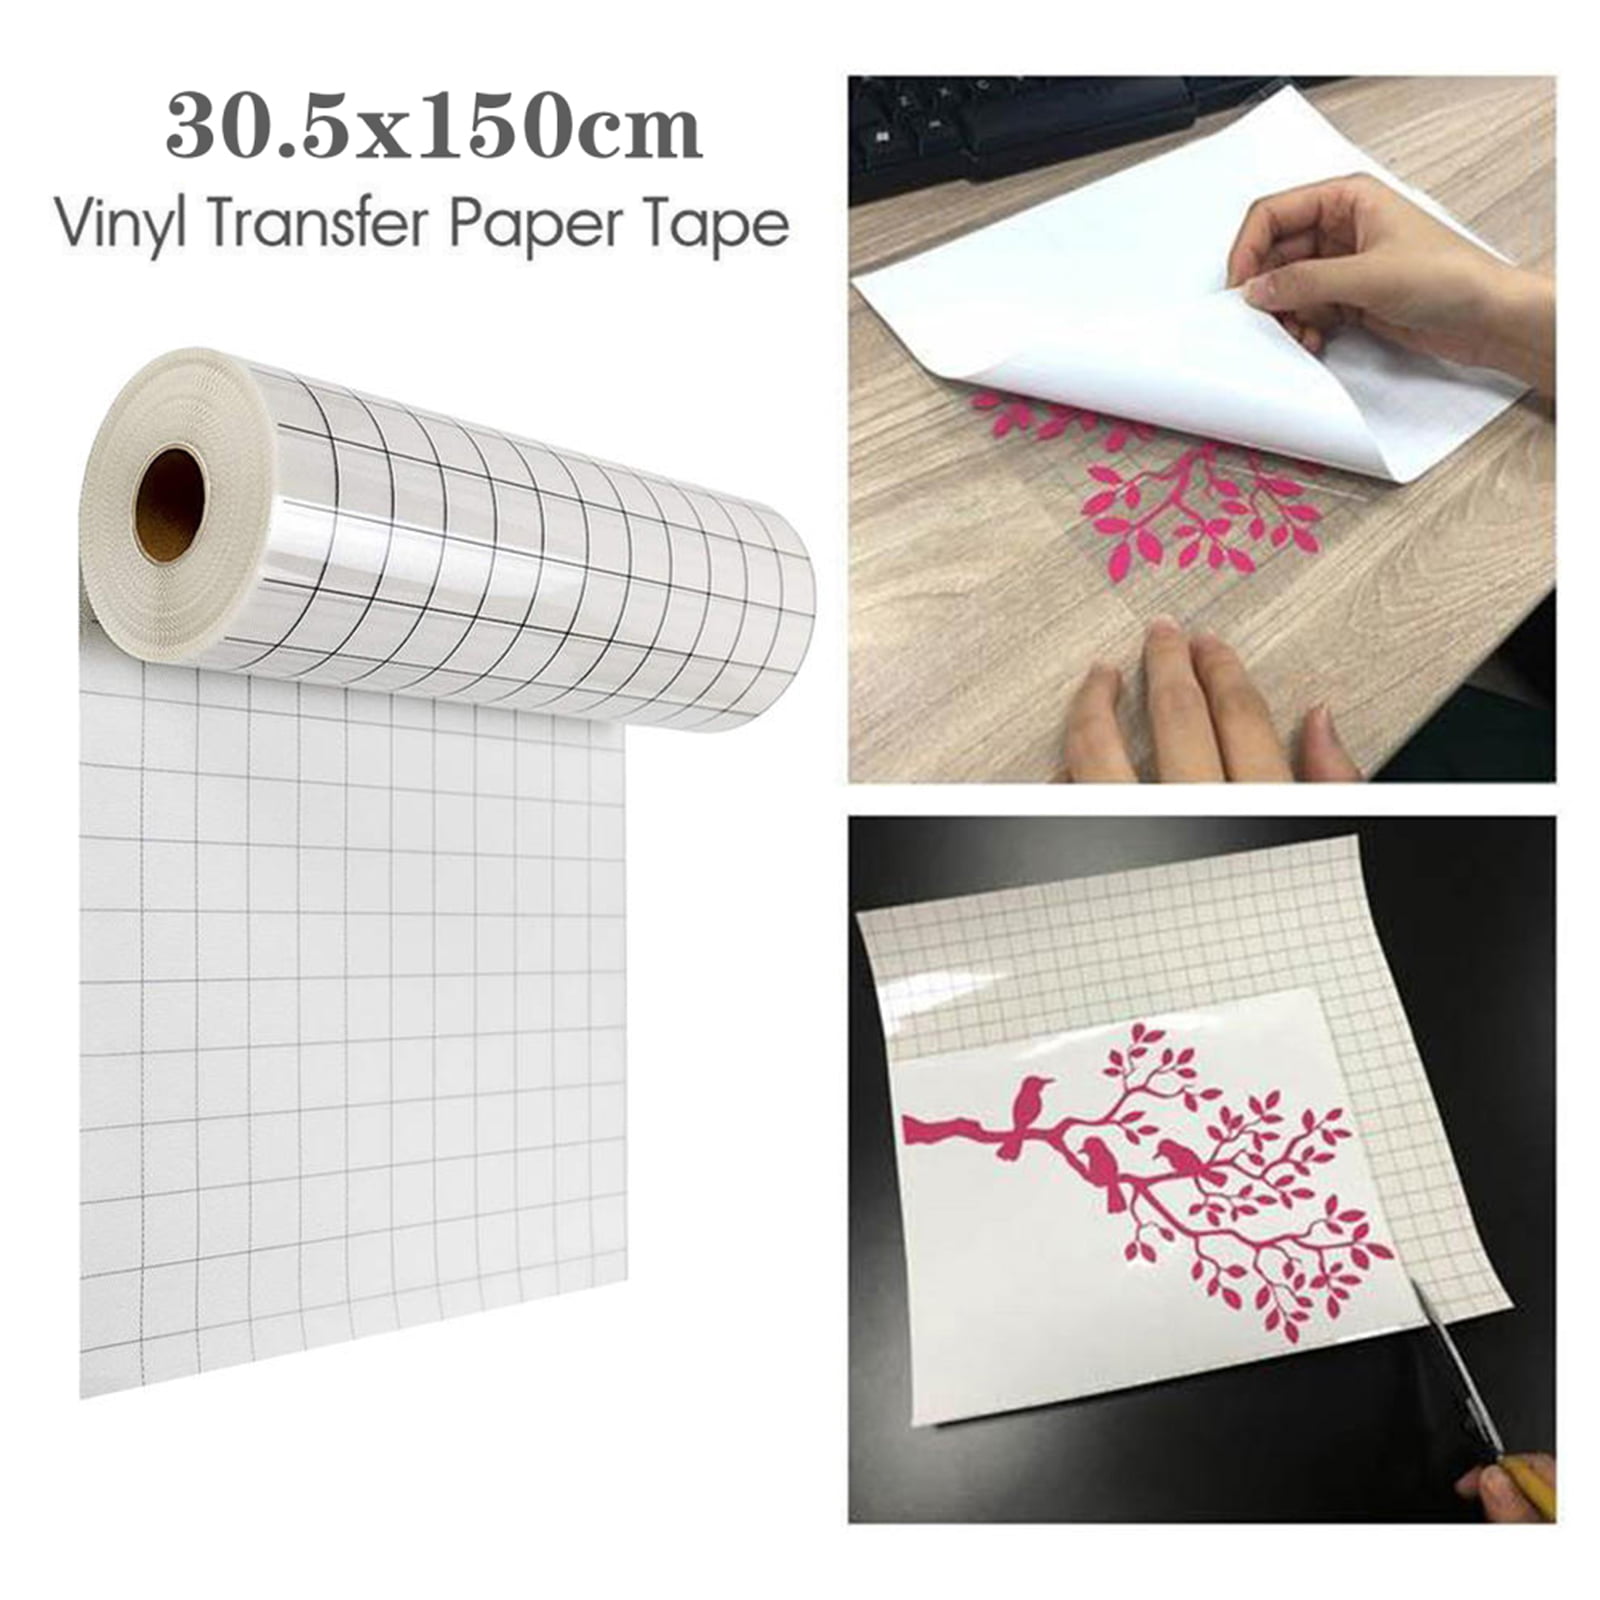 YRYM HT Clear Vinyl Transfer Paper Tape Roll-12 x 50 FT w/Alignment Grid  Application Tape for Silhouette Cameo Cricut Adhesive Vinyl for Decals  Signs Windows Stickers